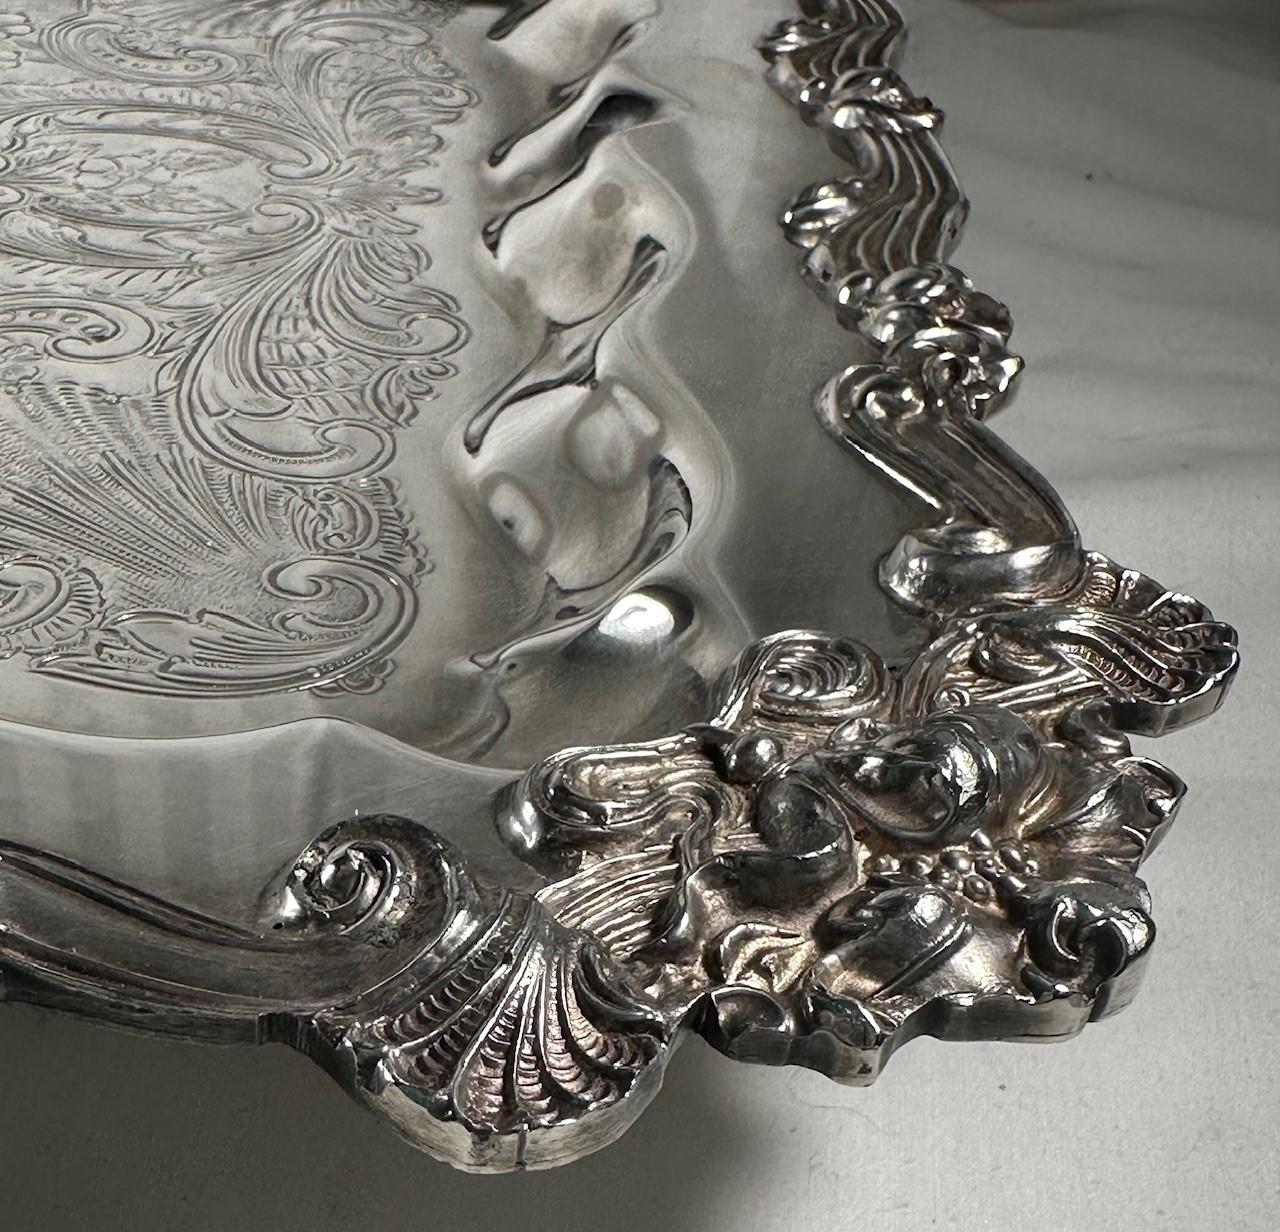 20th Century Ornate Square Footed Silver Plate Serving Tray.

	This tray is created in beautifully detailed scrollwork against a mottled background and offset by a highly ornate scroll border surrounded by a plain central cartouche. The decorative